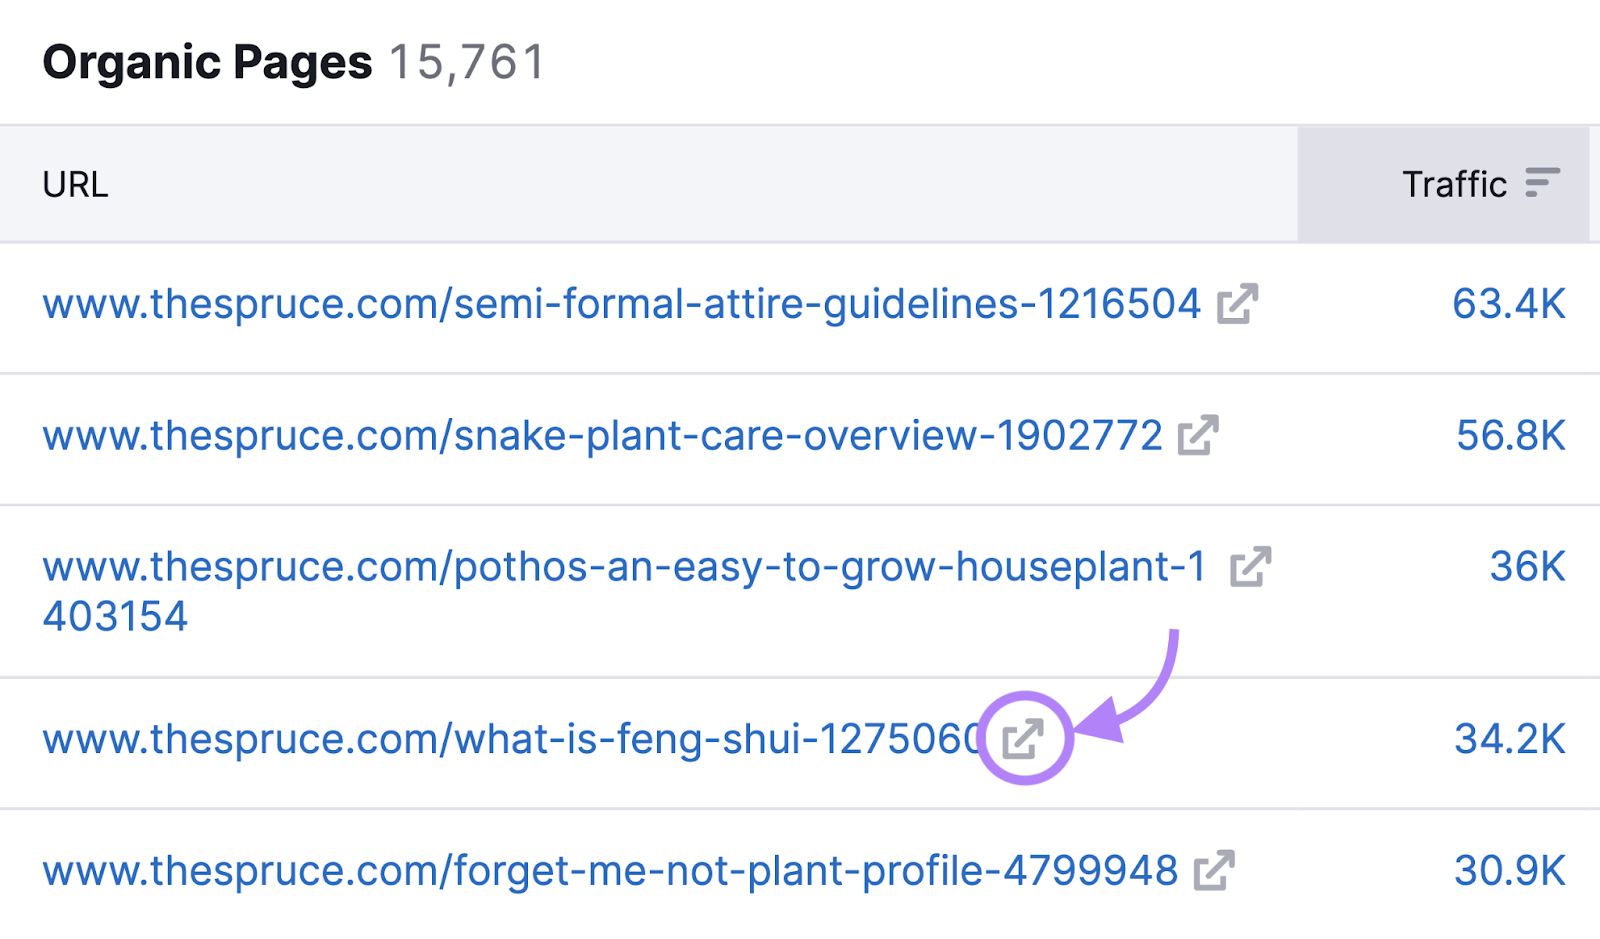 An icon next to the selected URL highlighted under "Organic Pages"